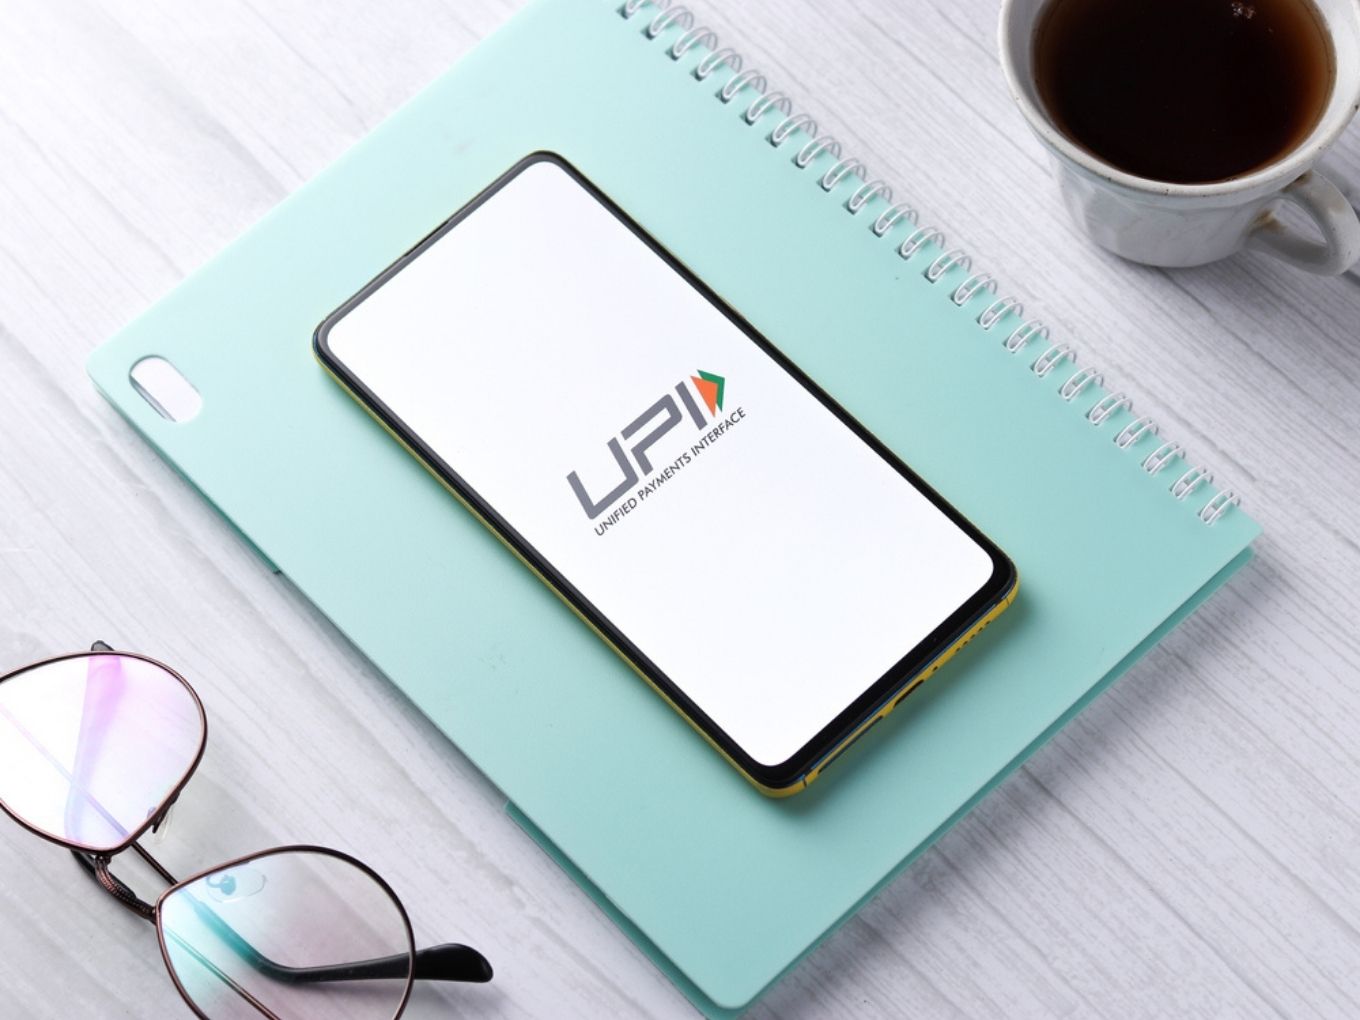 You are currently viewing UPI Transactions Register First Dip In Volume Since April 2020